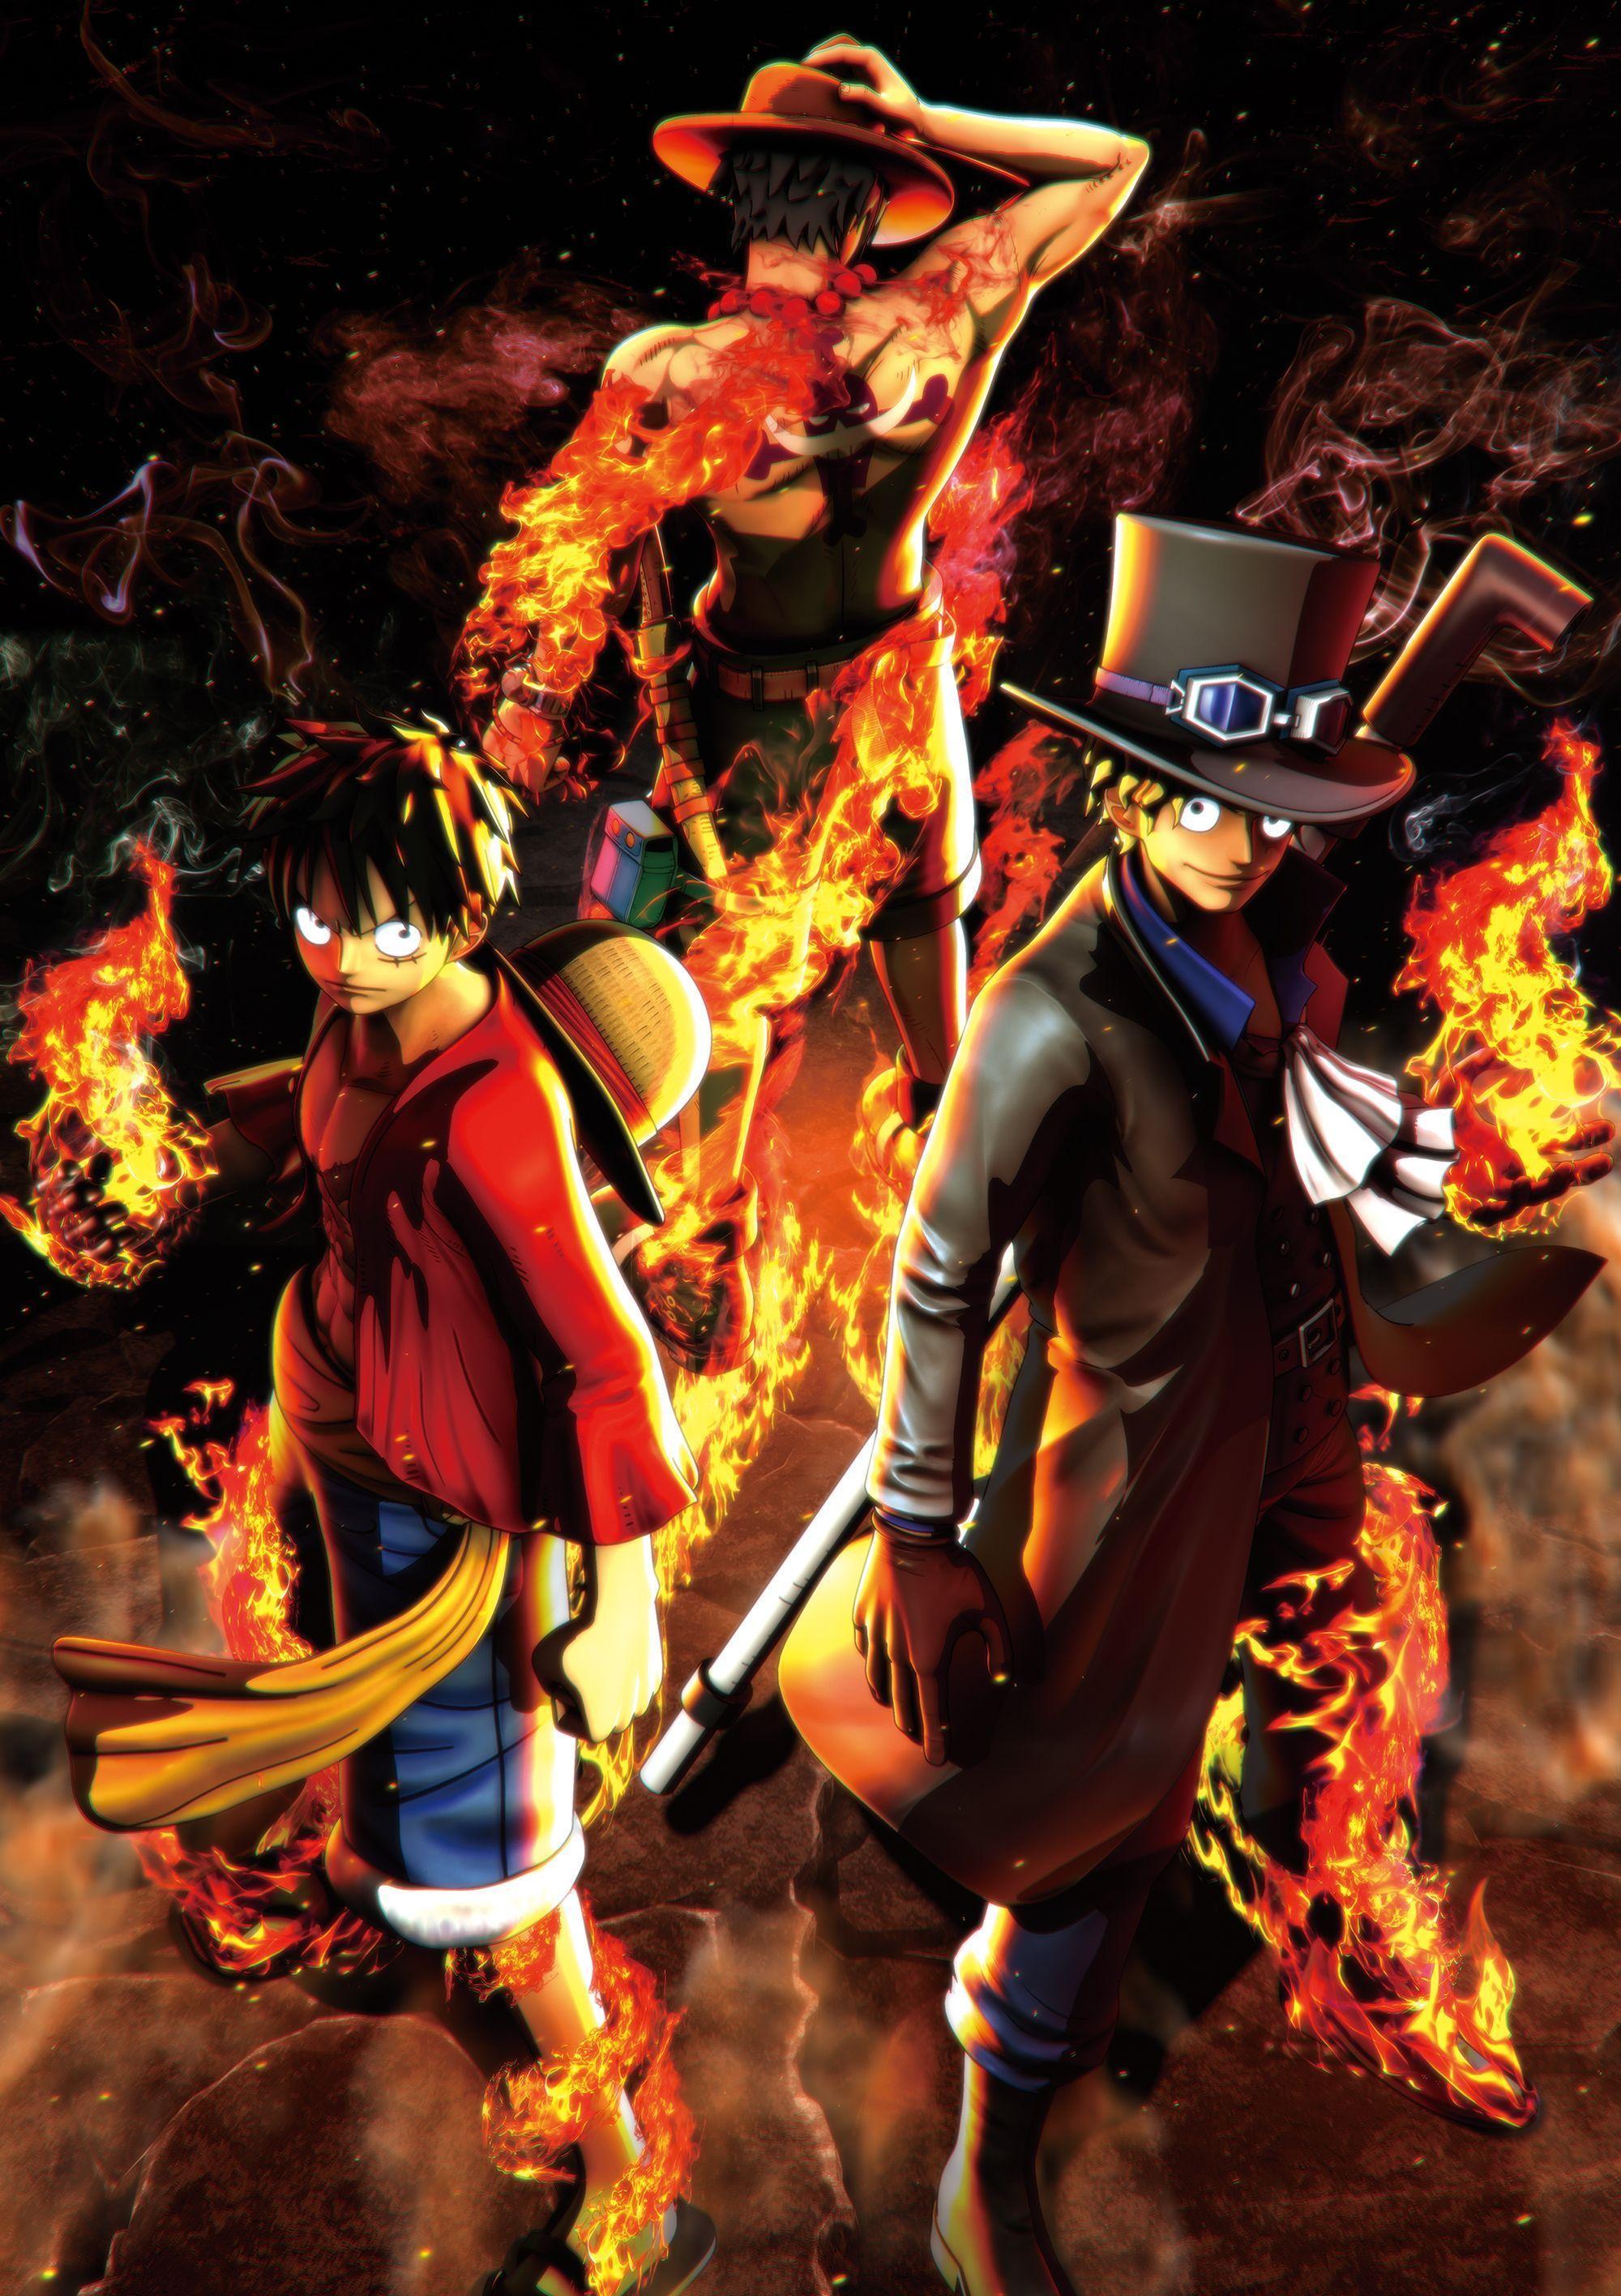 One Piece: Burning Blood D. Luffy, Portgas D. Ace, Sabo